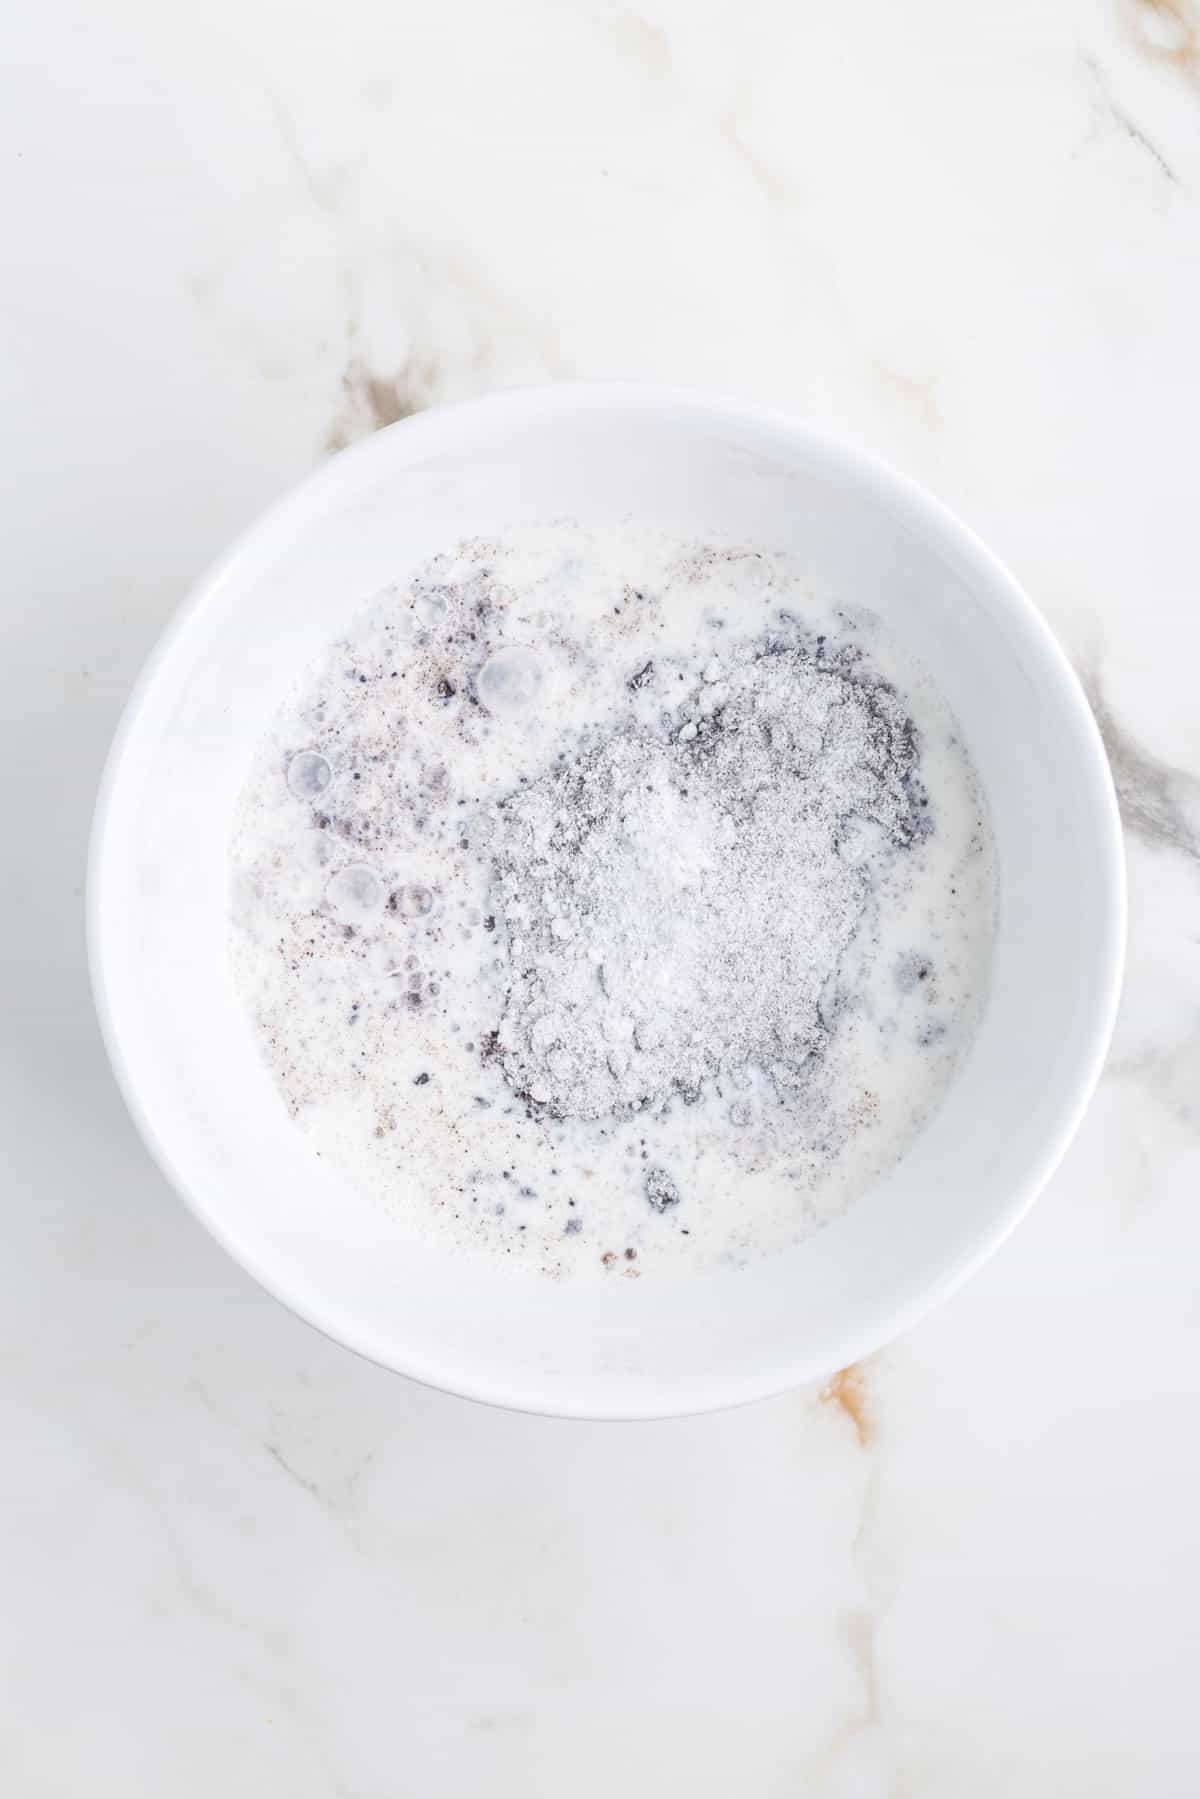 milk and Oreo pudding mix in a mixing bowl